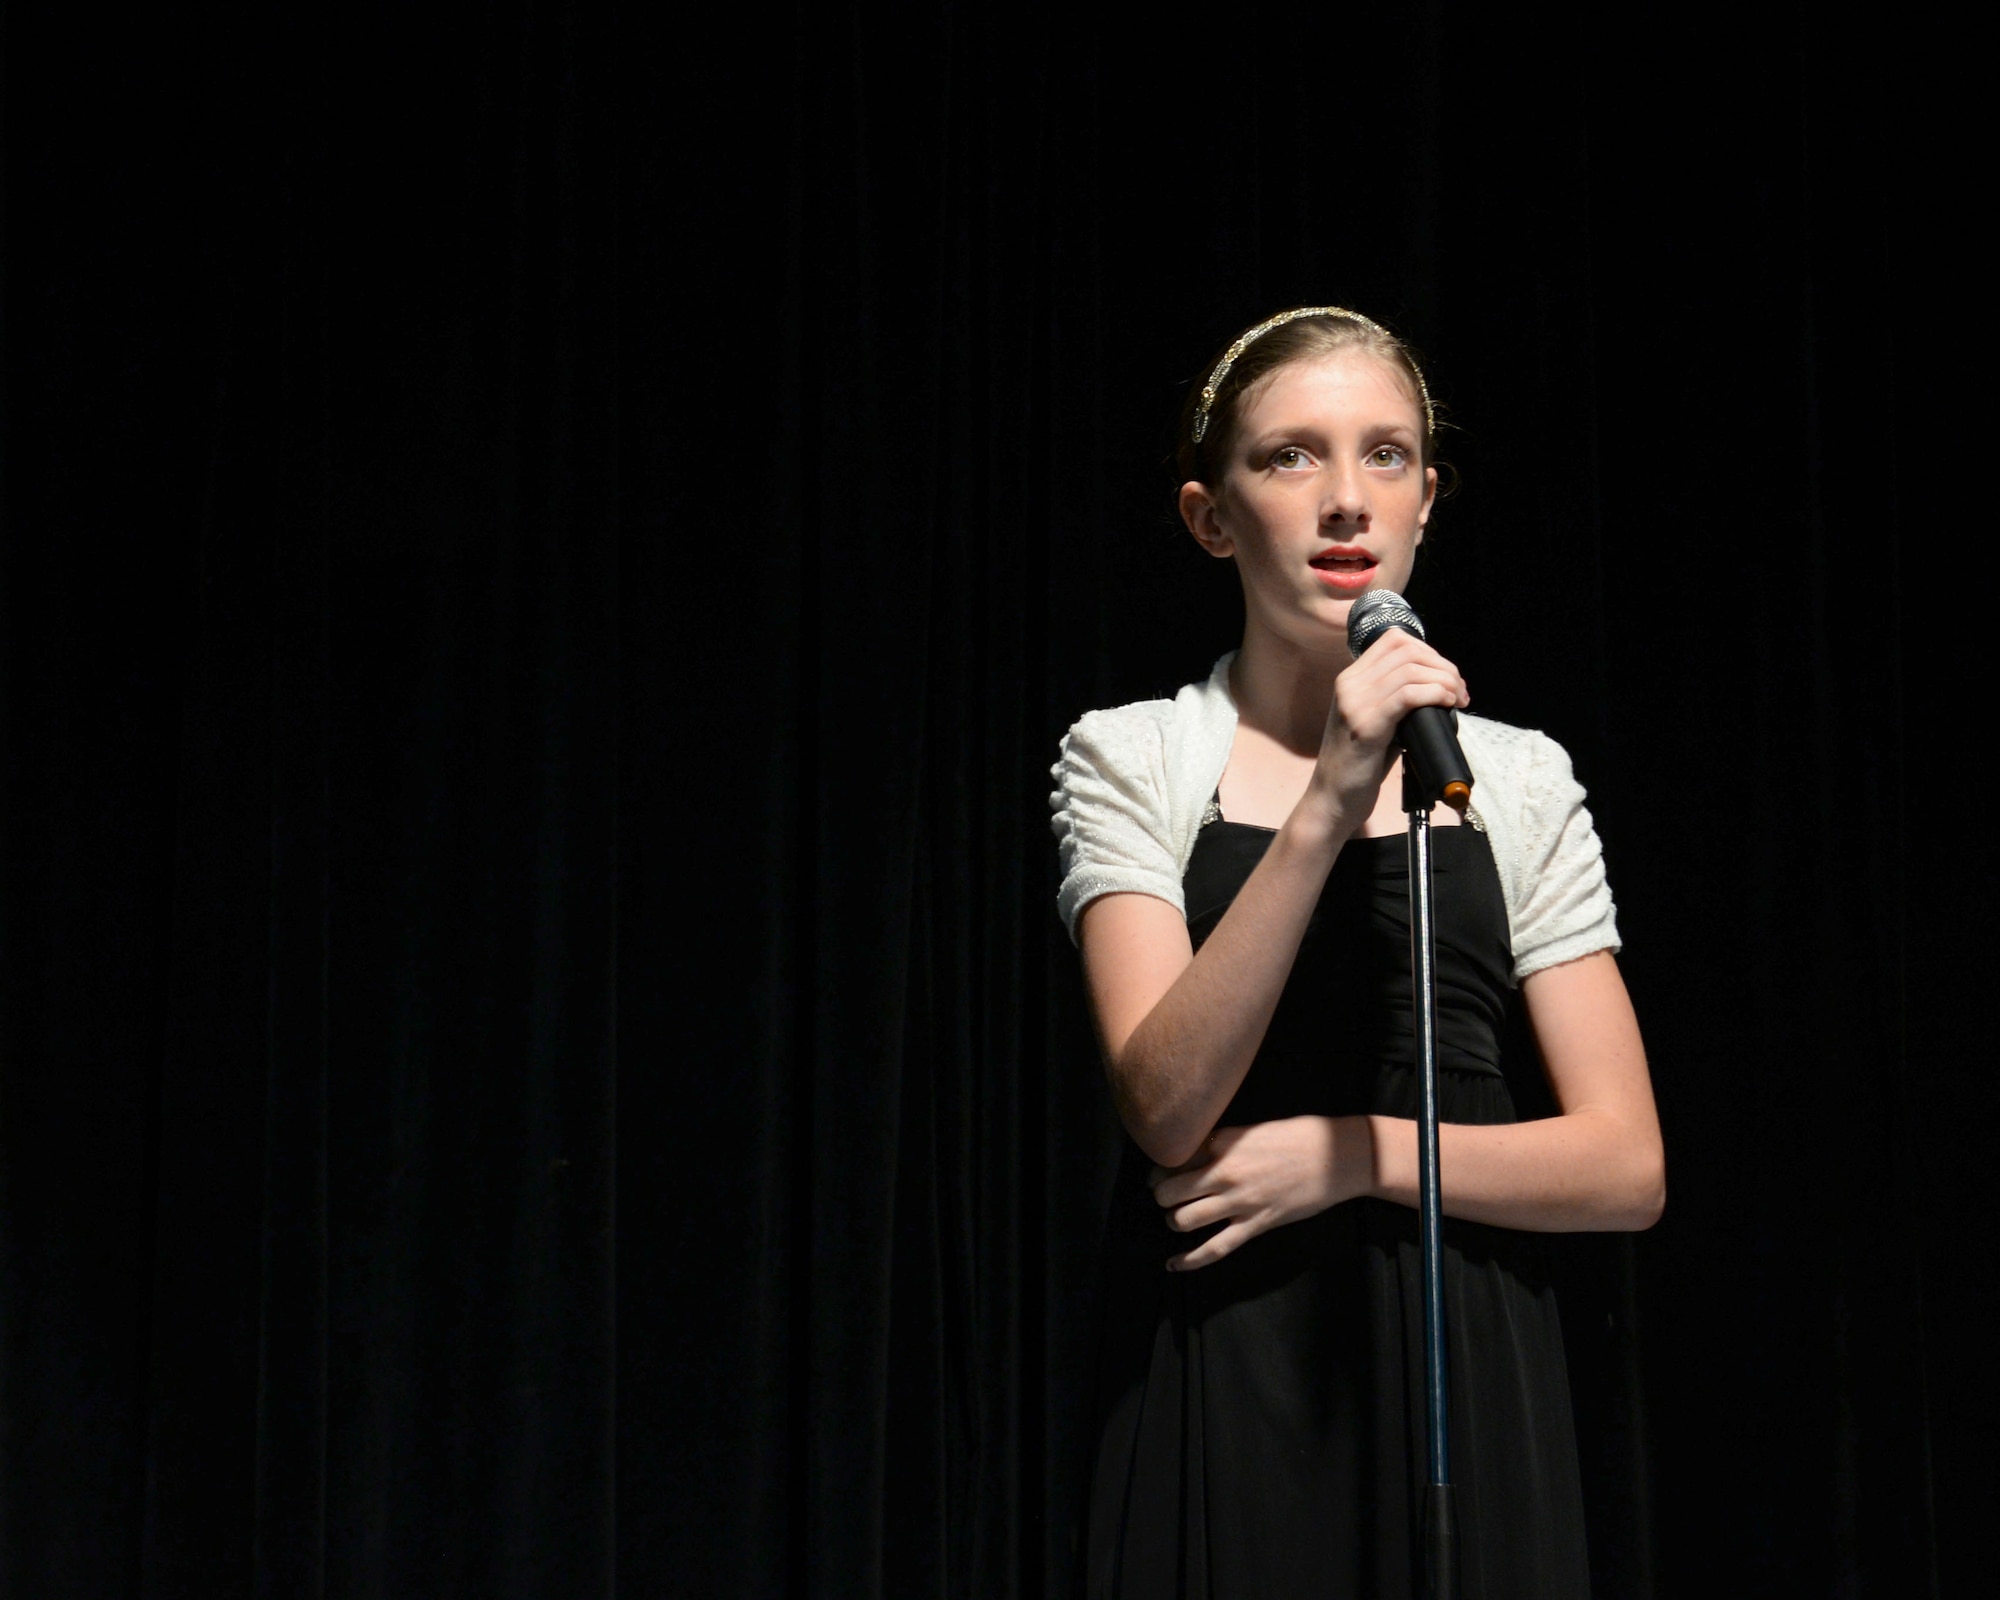 Haylee, contestant, sings during an audition for Operation Talent Search May 7, 2015, at Andersen Air Force Base, Guam. The Operation Talent Search Air Force level overall winner will compete online with the winners from two other talent competitions, Mission Audition and #Vocal Upload, to become the Air Force Entertainer of the Year. (U.S. Air Force photo by Senior Airman Amanda Morris/Released)